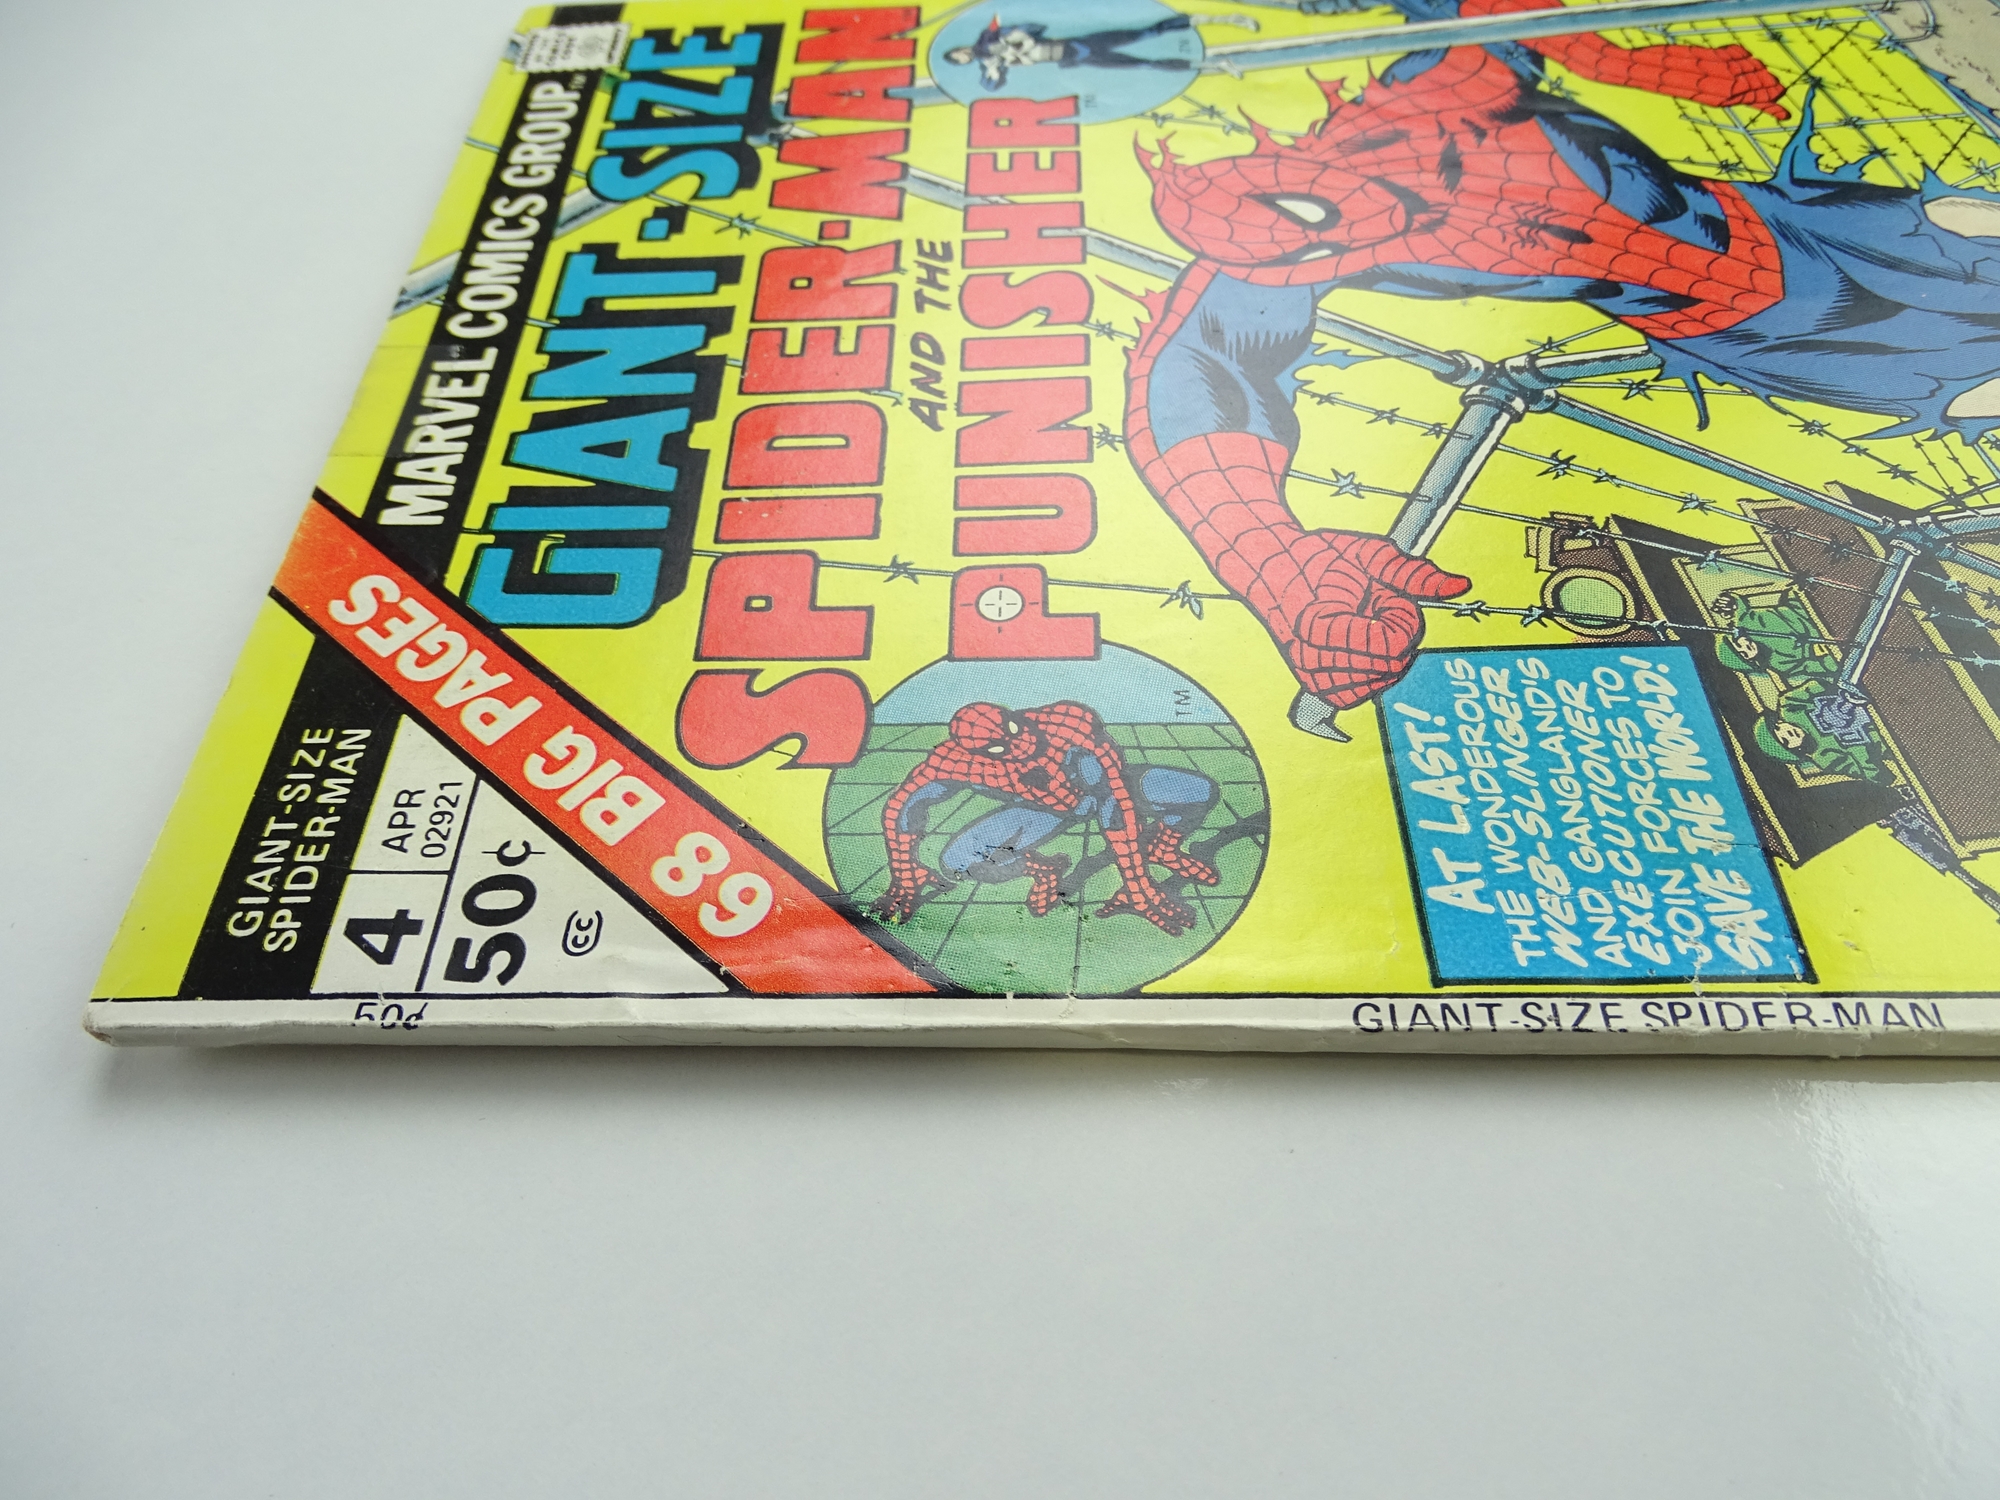 GIANT-SIZE SPIDER-MAN & PUNISHER # 4 (1975 - MARVEL - Cents Copy) - Third appearance of the Punisher - Image 6 of 7